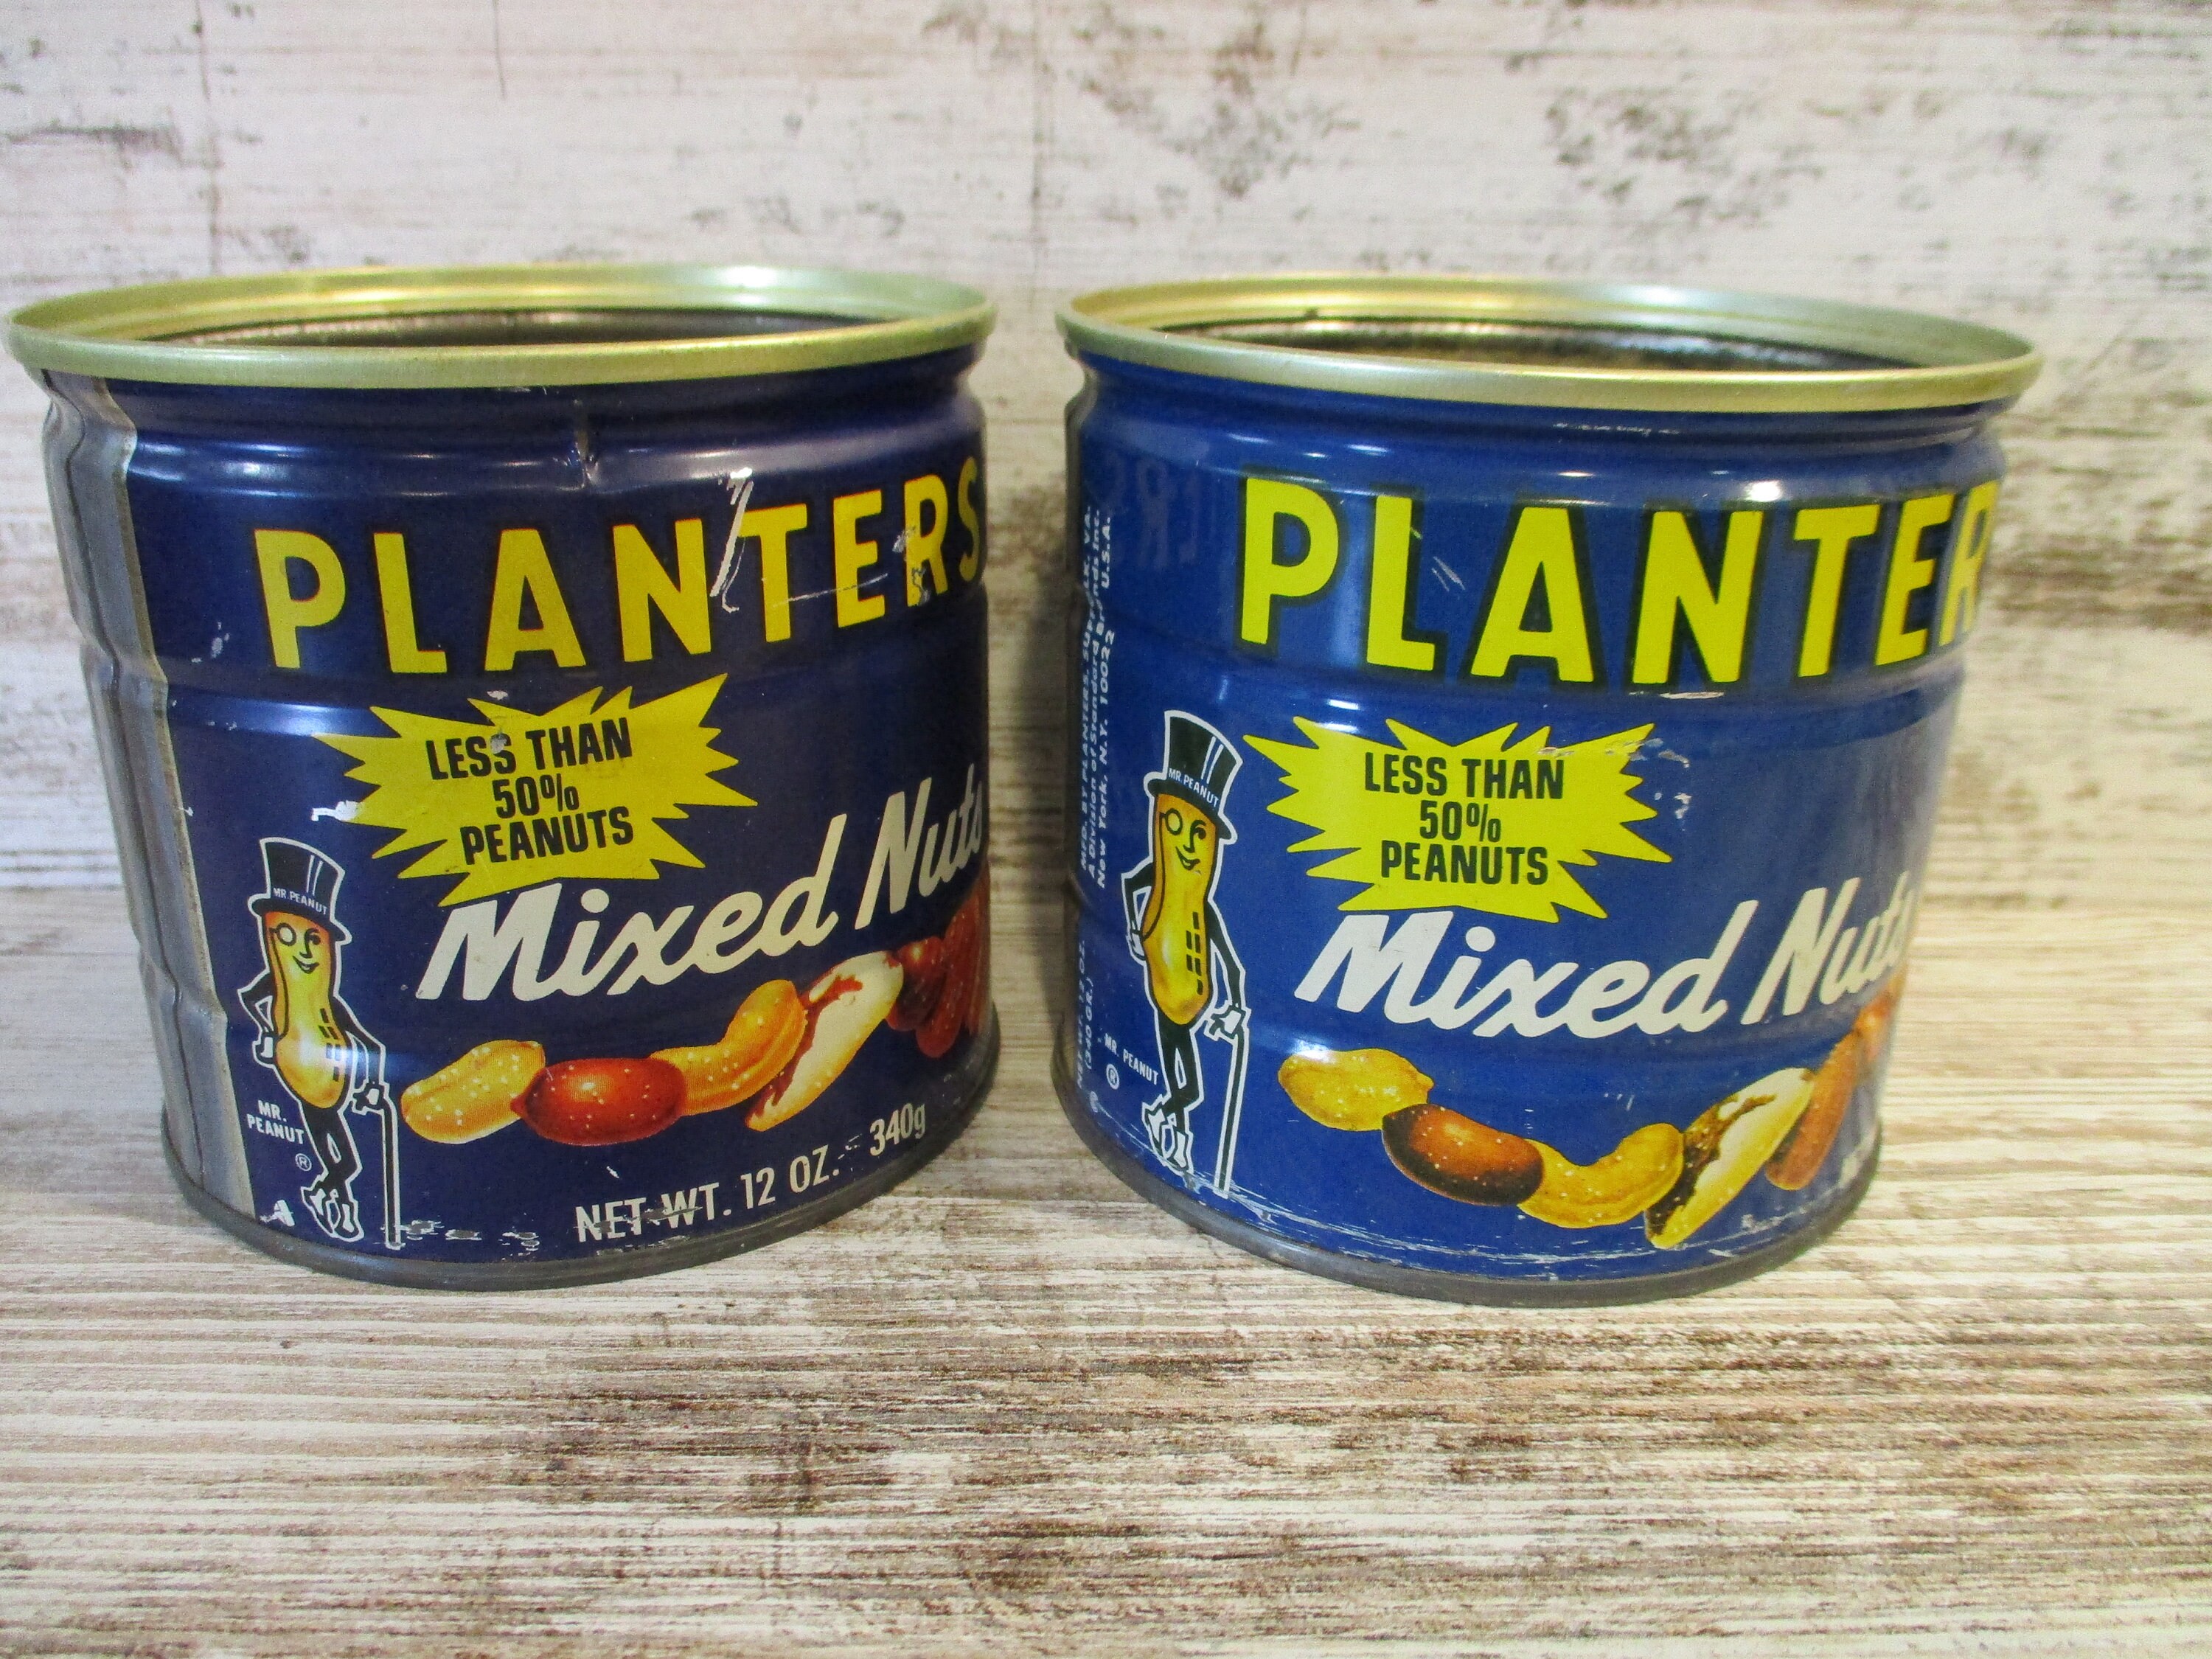 Reduced 6 Vintage Food Tin Cans Label Storage for Home, Cutlery